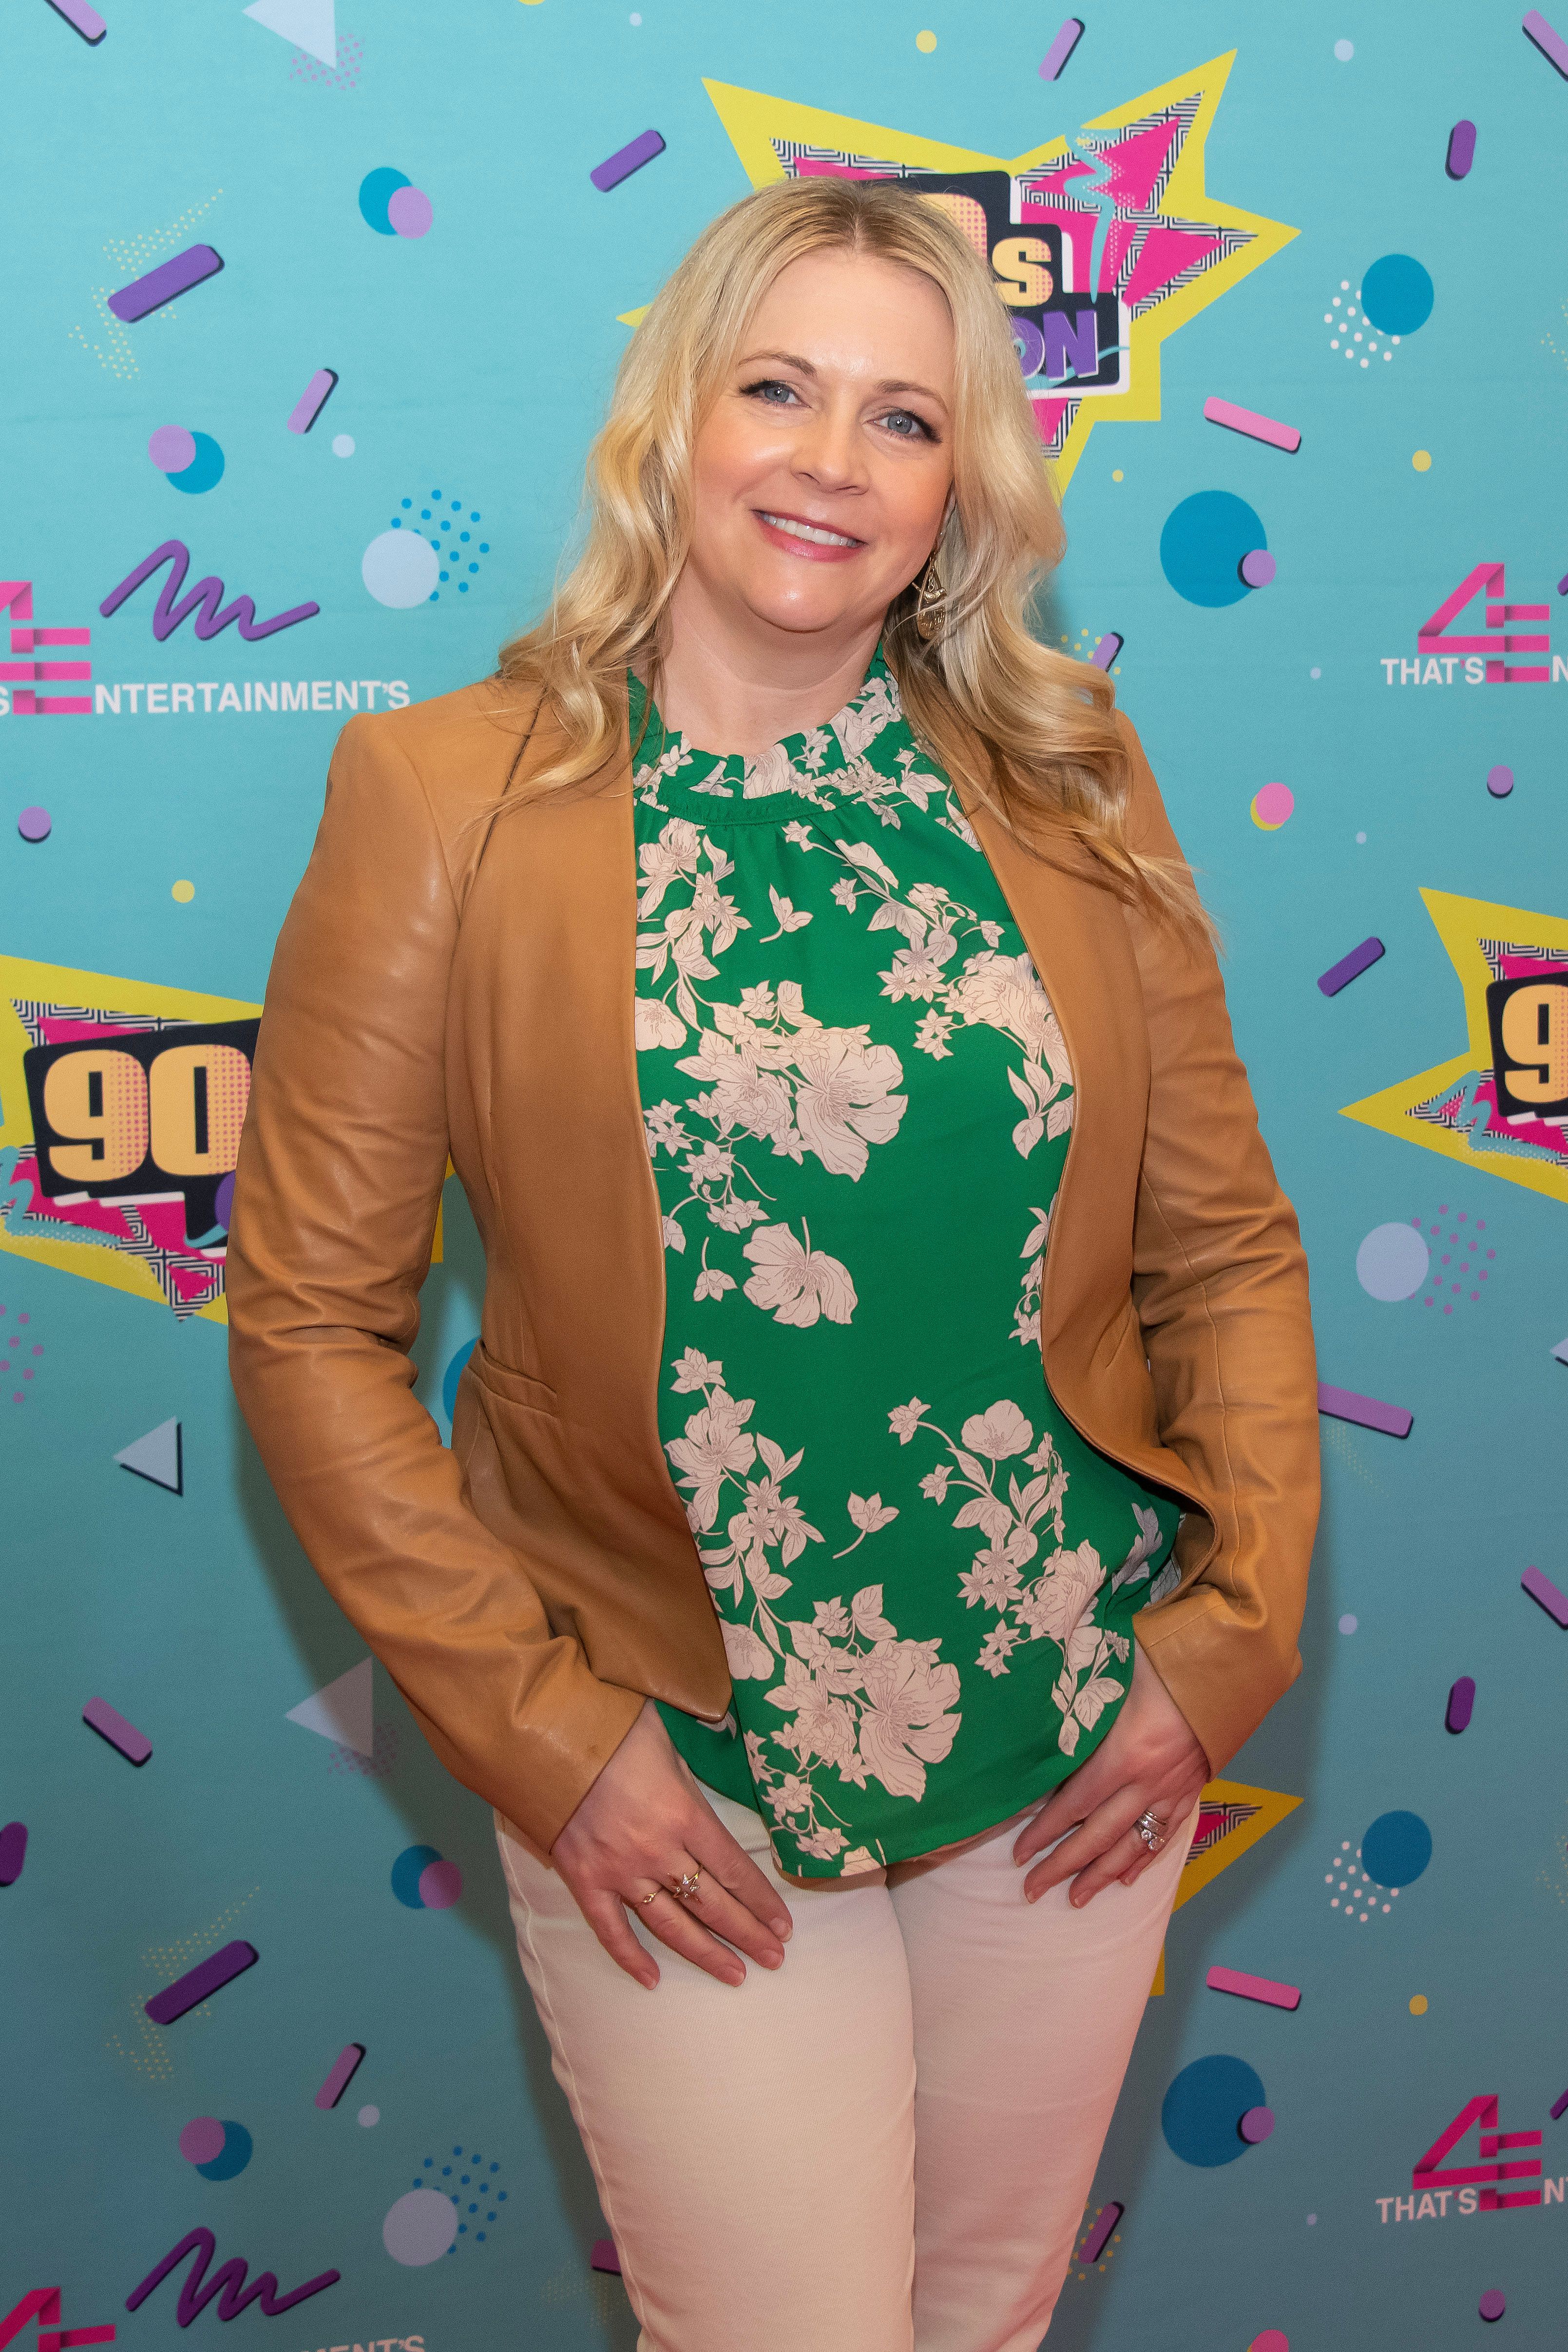 Melissa Joan Hart during 90s Con in Hartford, Connecticut, on March 18, 2023. | Source: Getty Images